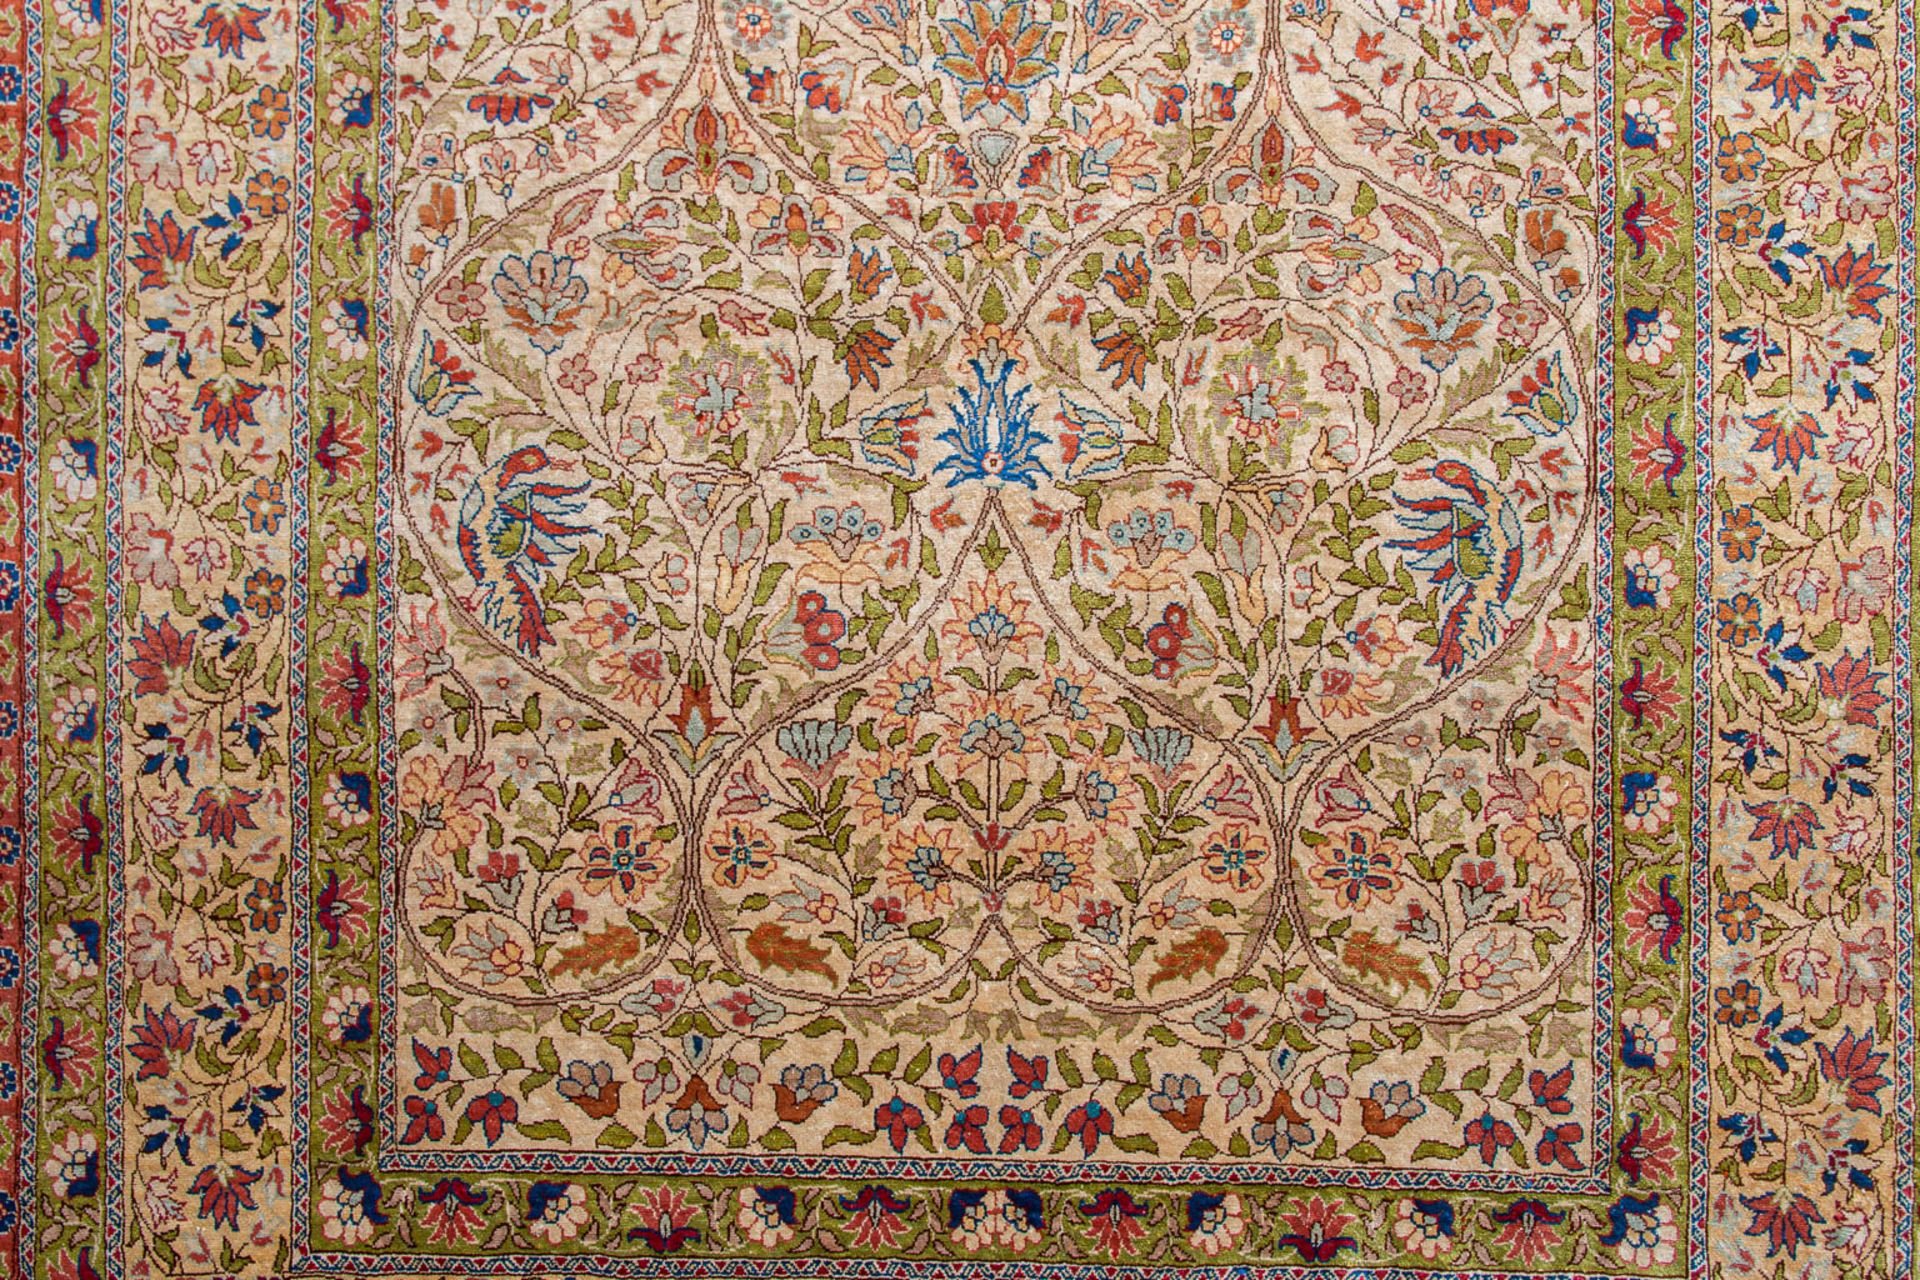 An Oriental hand-made carpet made of silk and marked Hereke (191 x 120) (120 x 190 cm) - Image 5 of 7